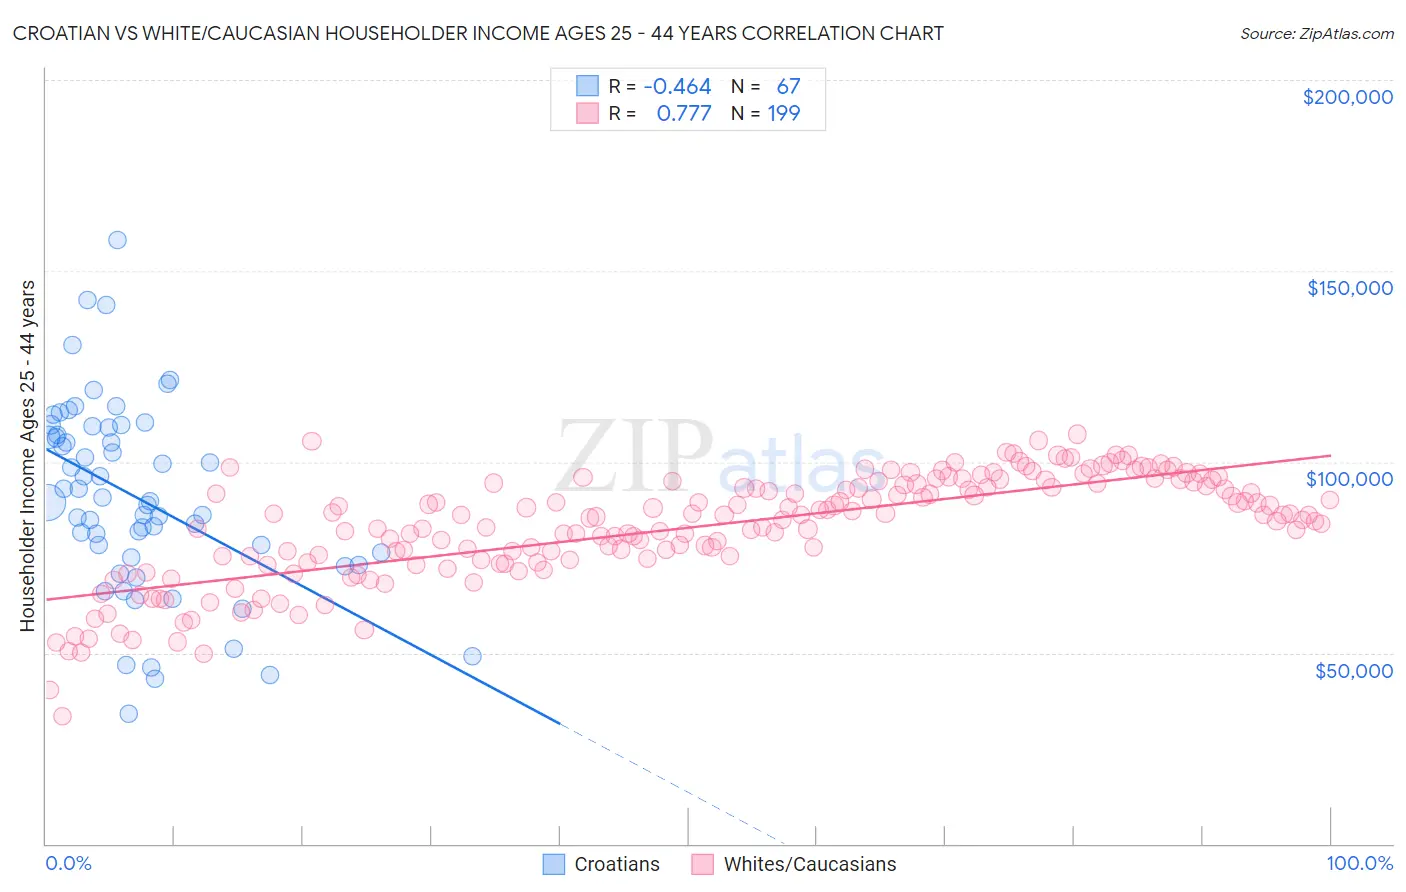 Croatian vs White/Caucasian Householder Income Ages 25 - 44 years